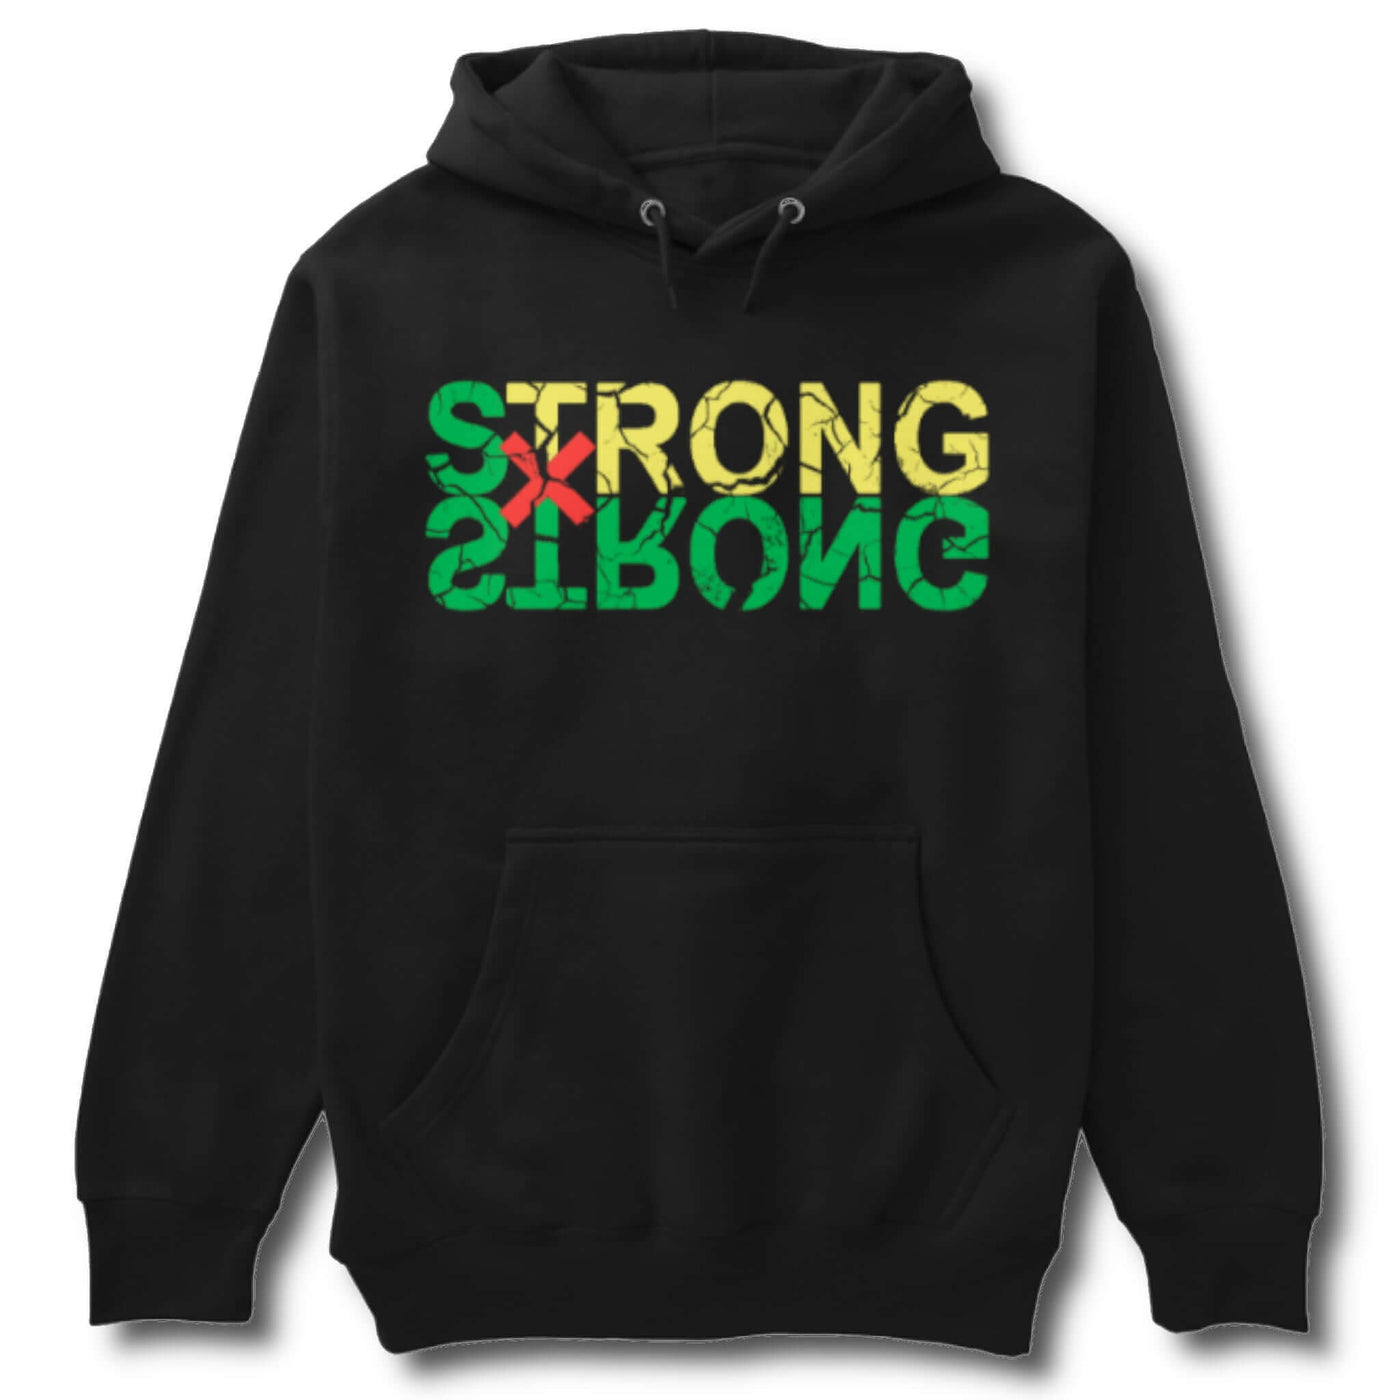 Strong x Strong print black hoodie inspired by Hunter x Hunter anime